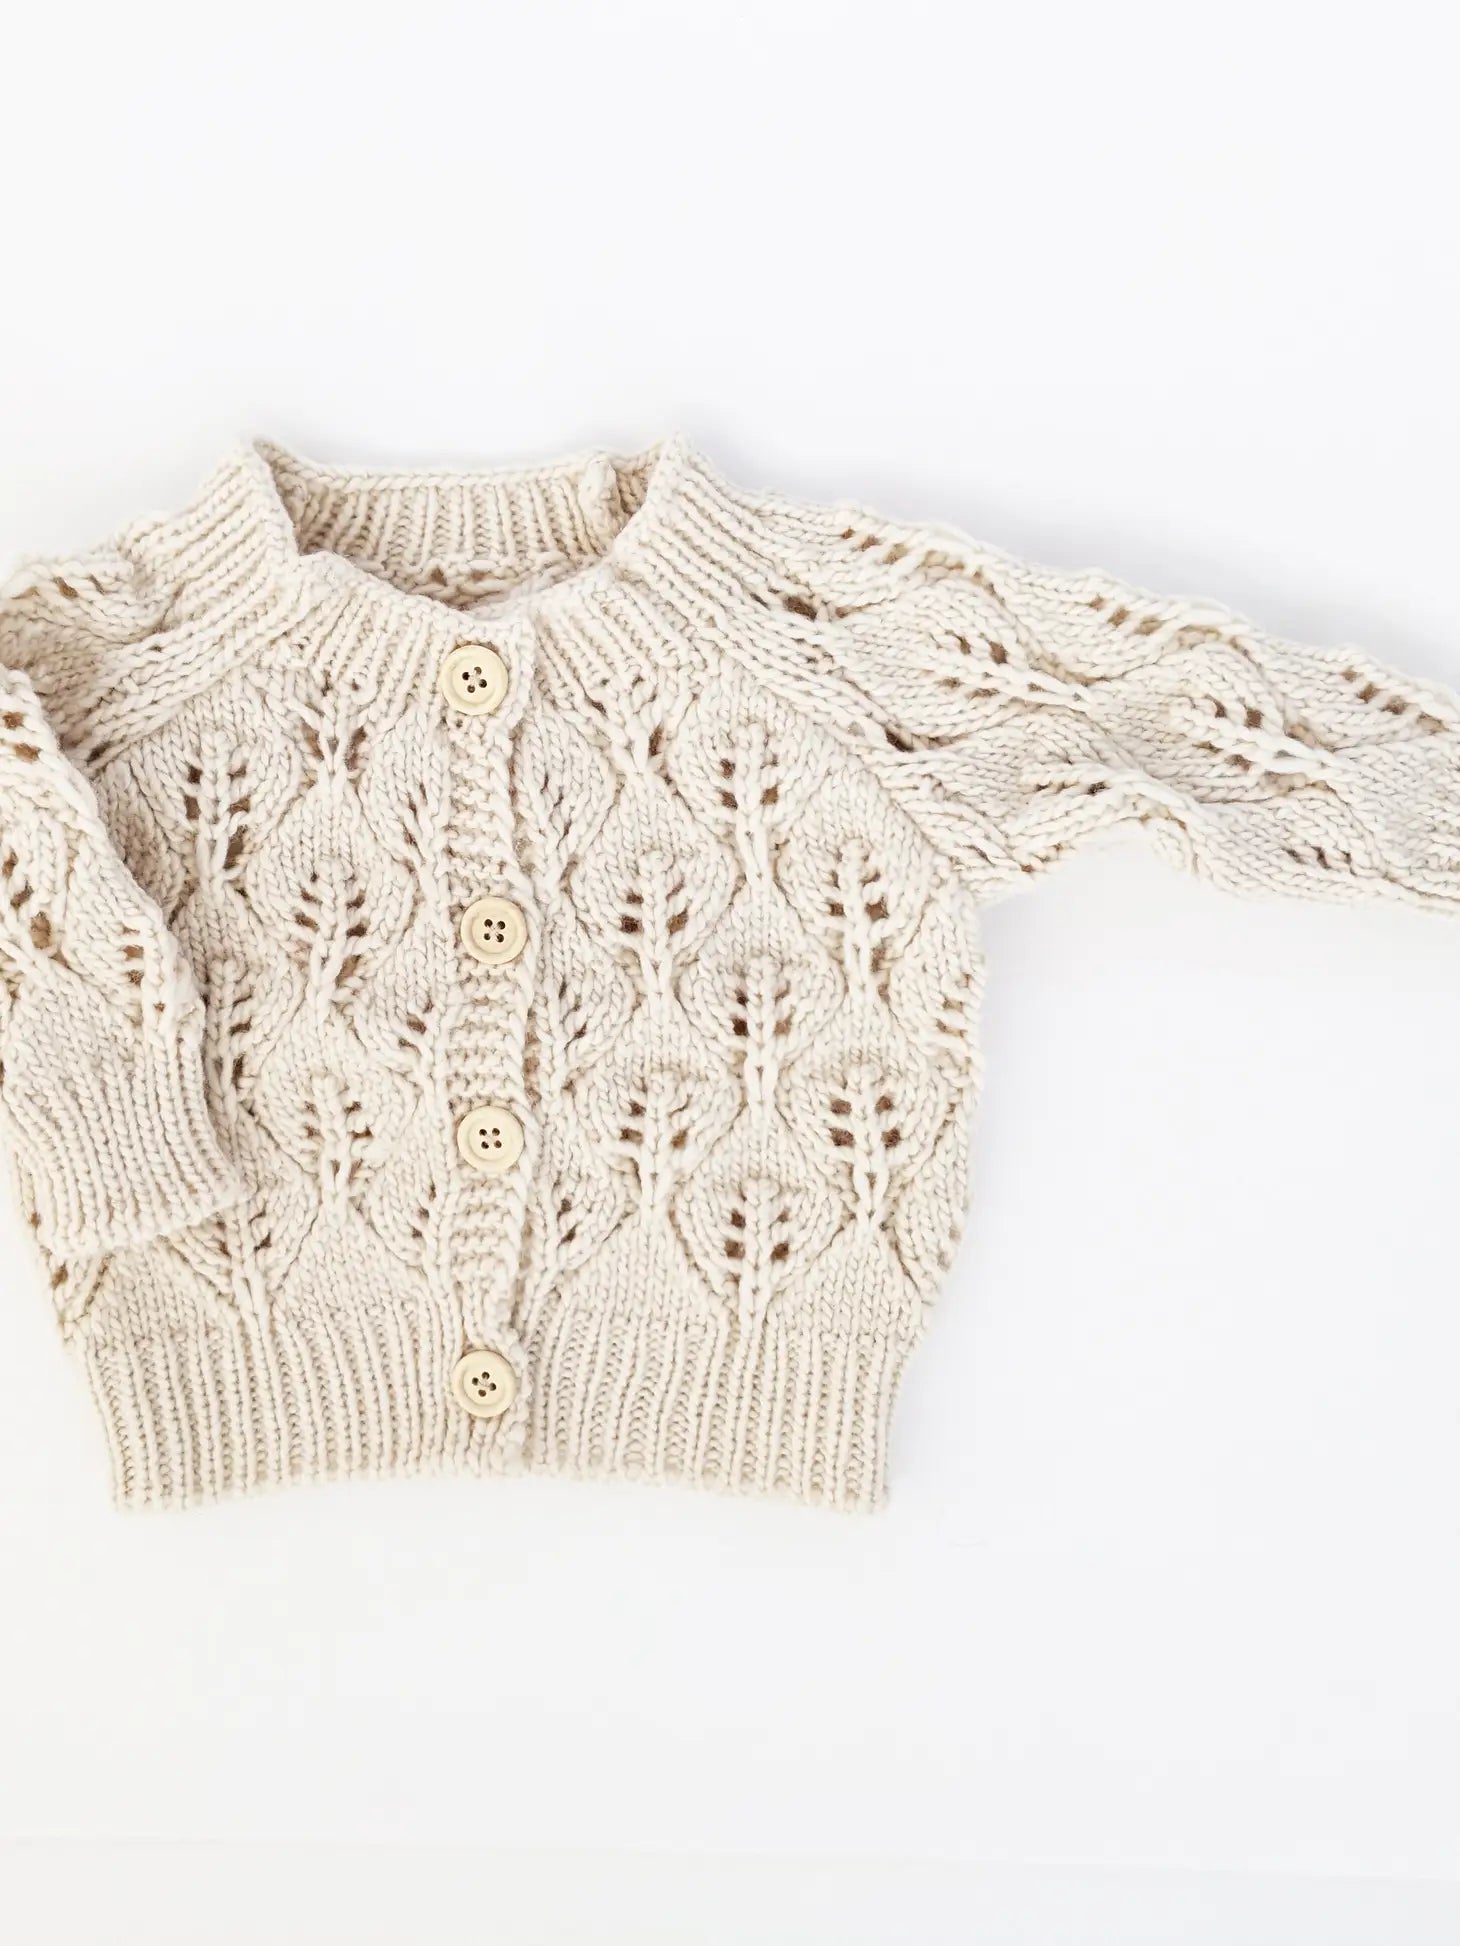 Leaf Lace Hand Knit Cardigan Sweater Natural